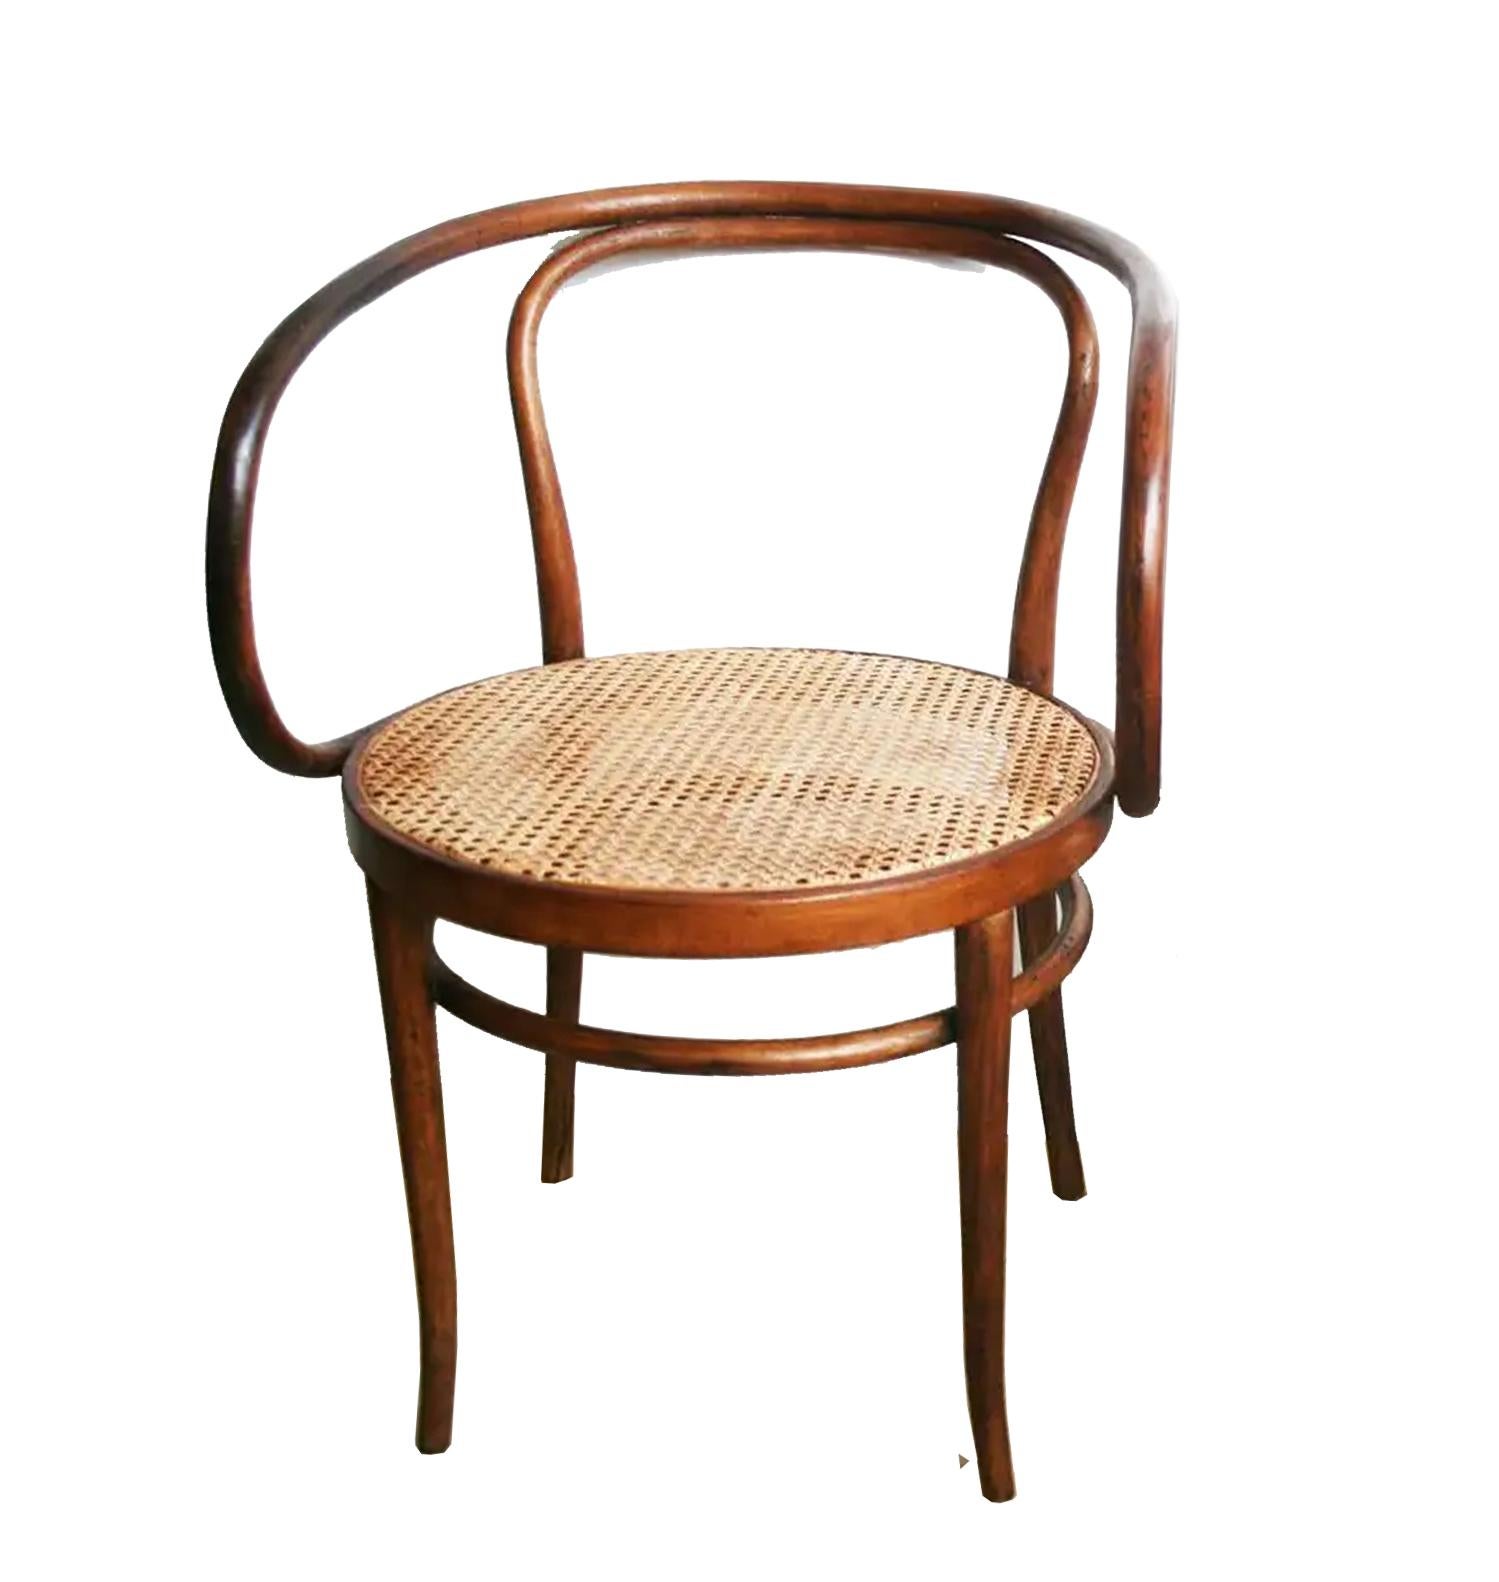 Mid-Century Modern Four Chairs or Archairs  After Thonet  Midcentury  209, Brown Bentwood, 1950s